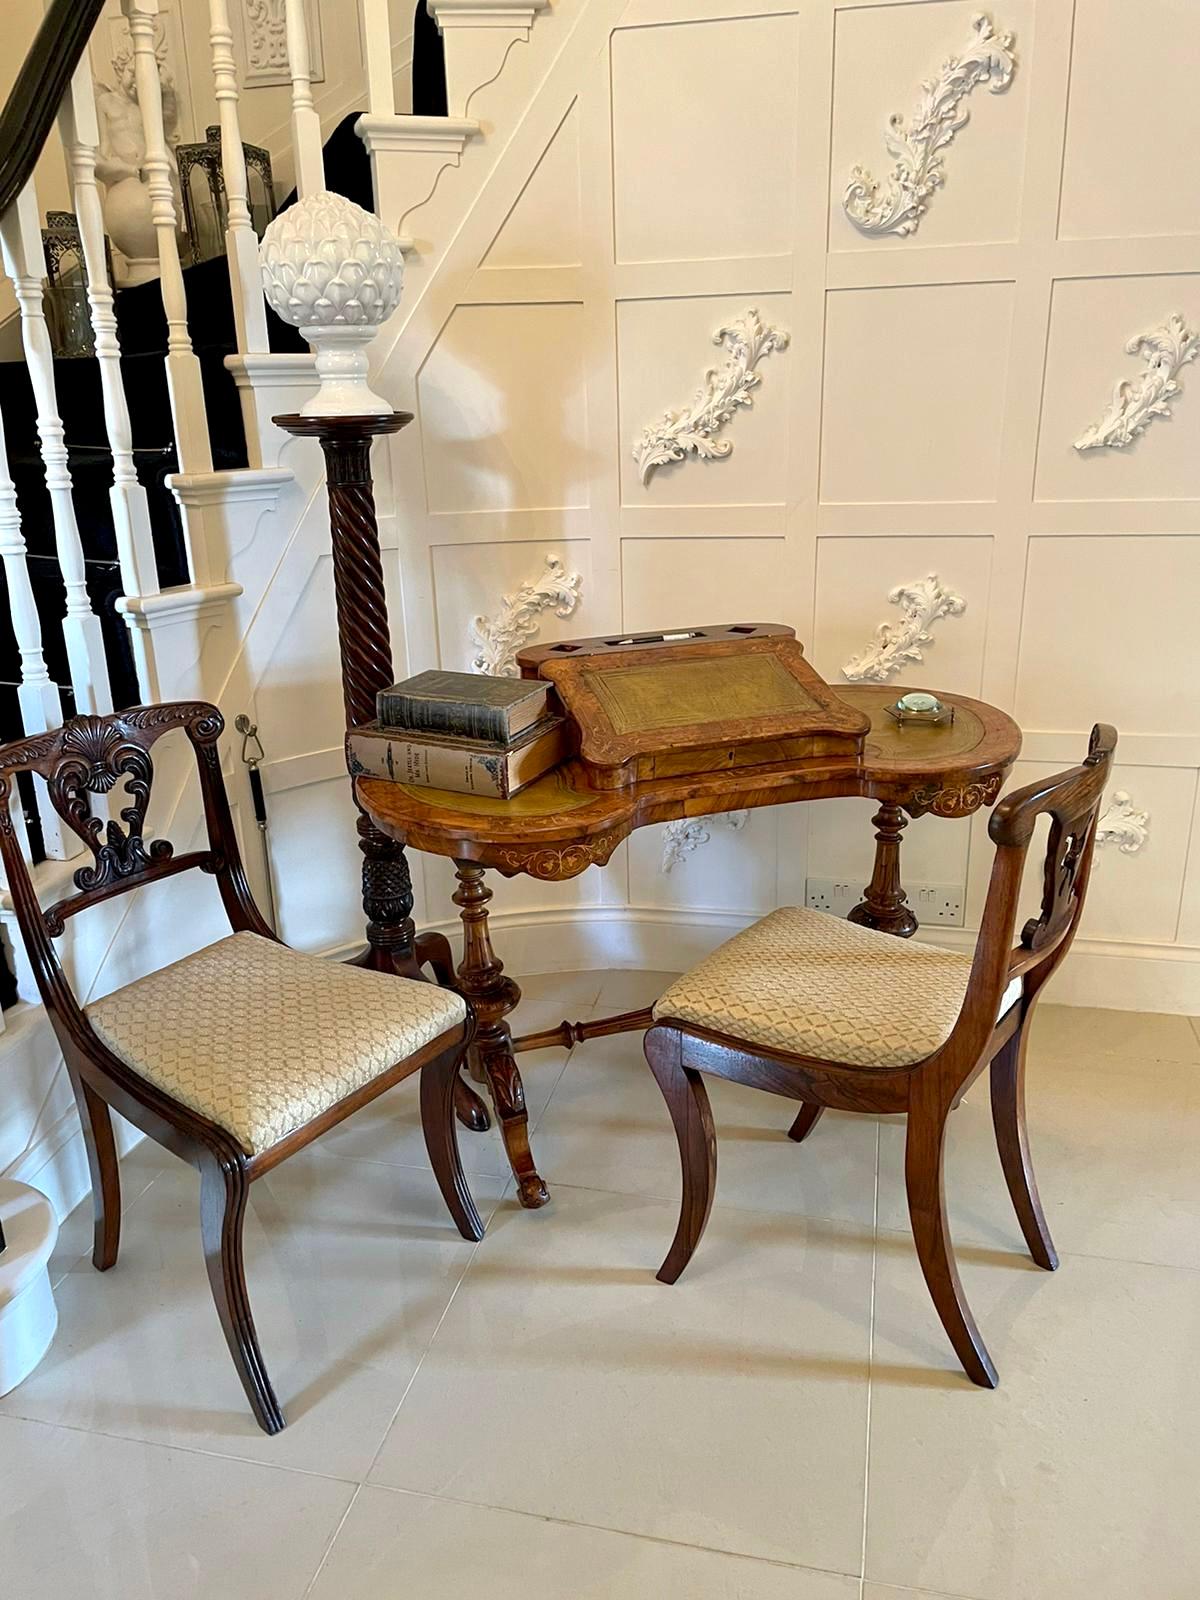 English ​​Antique Victorian Freestanding Inlaid Burr Walnut Kidney Shaped Writing Table For Sale